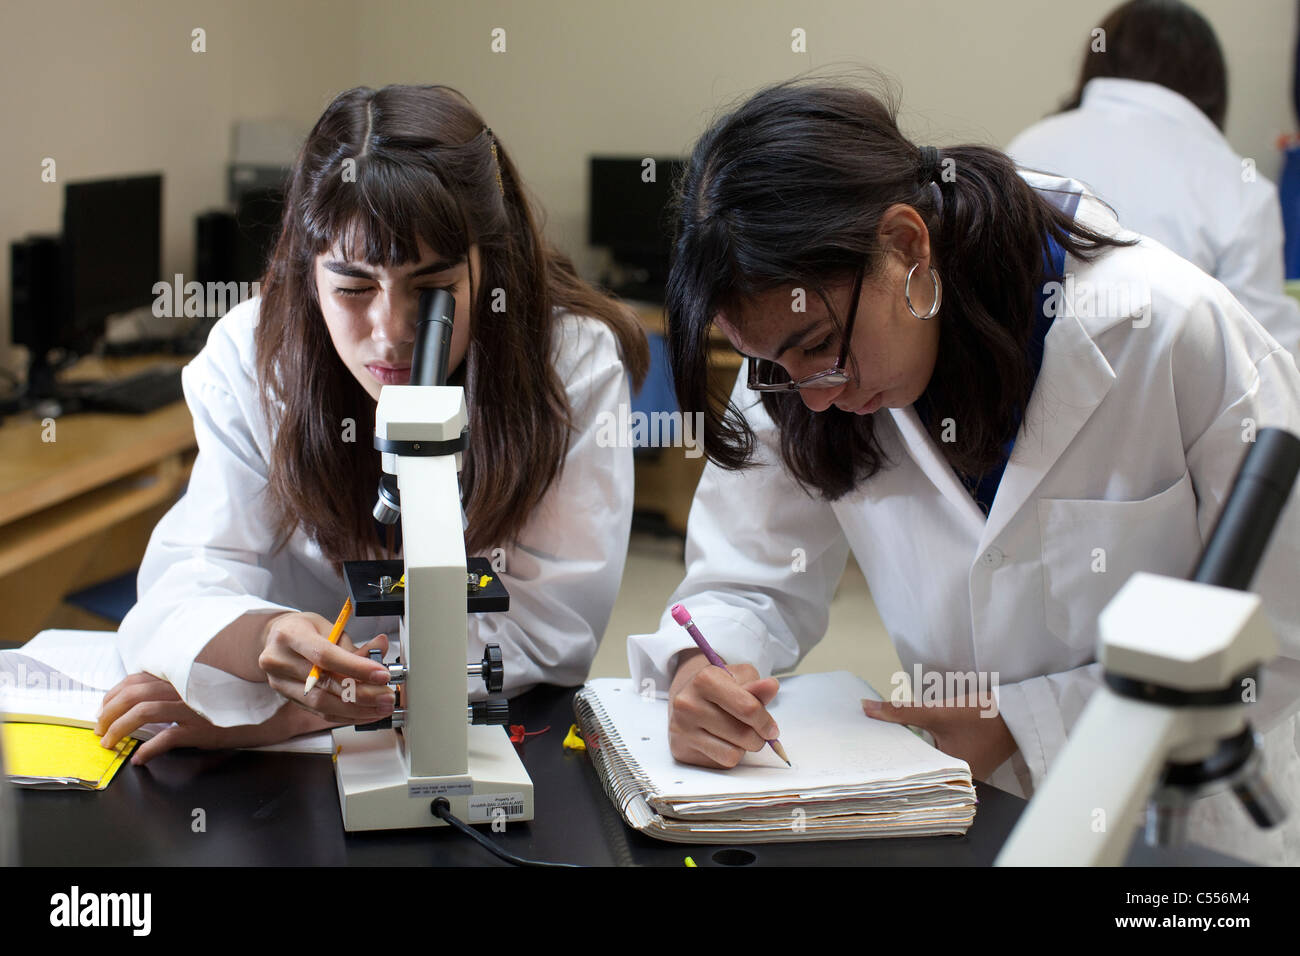 female student  use microscopes in South Texas high school science classroom while classmate writes notes Stock Photo